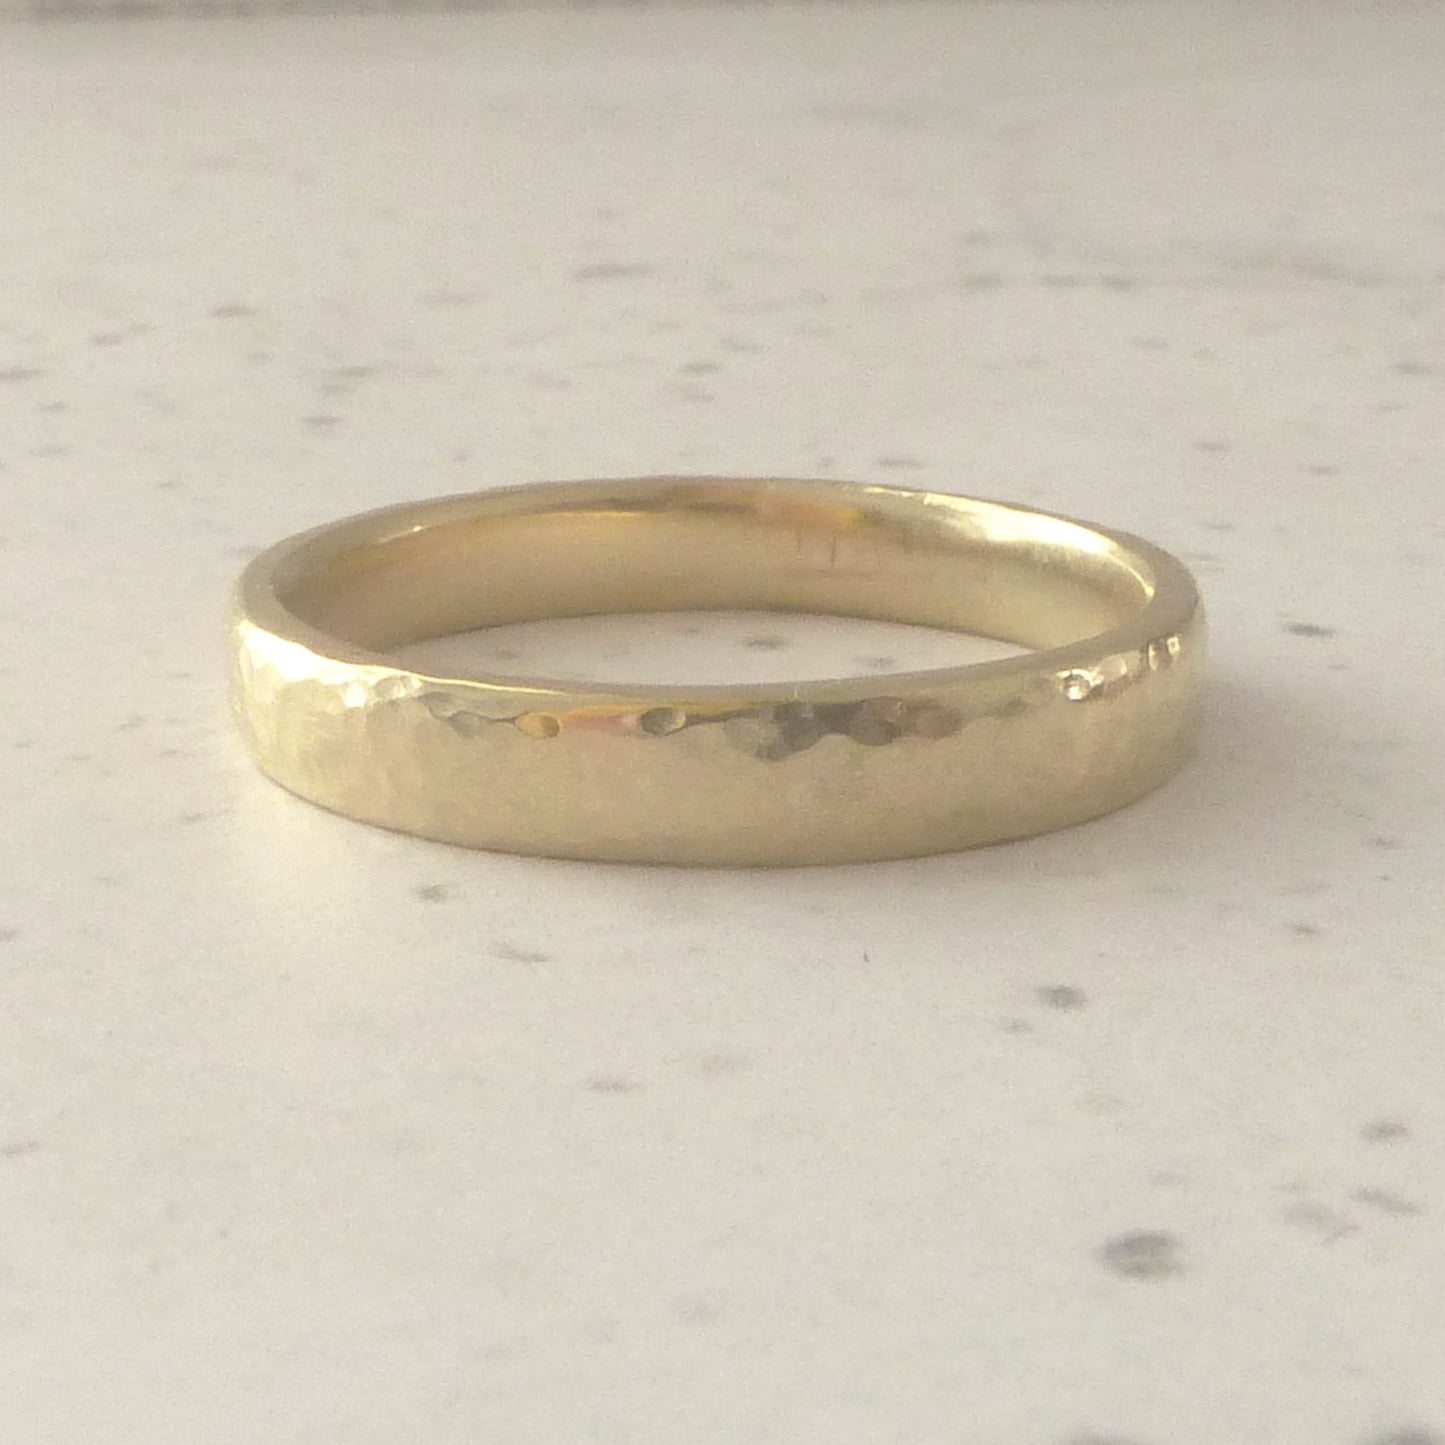 3mm wedding band in 9ct yellow gold, recycled. Soft edged hand made band